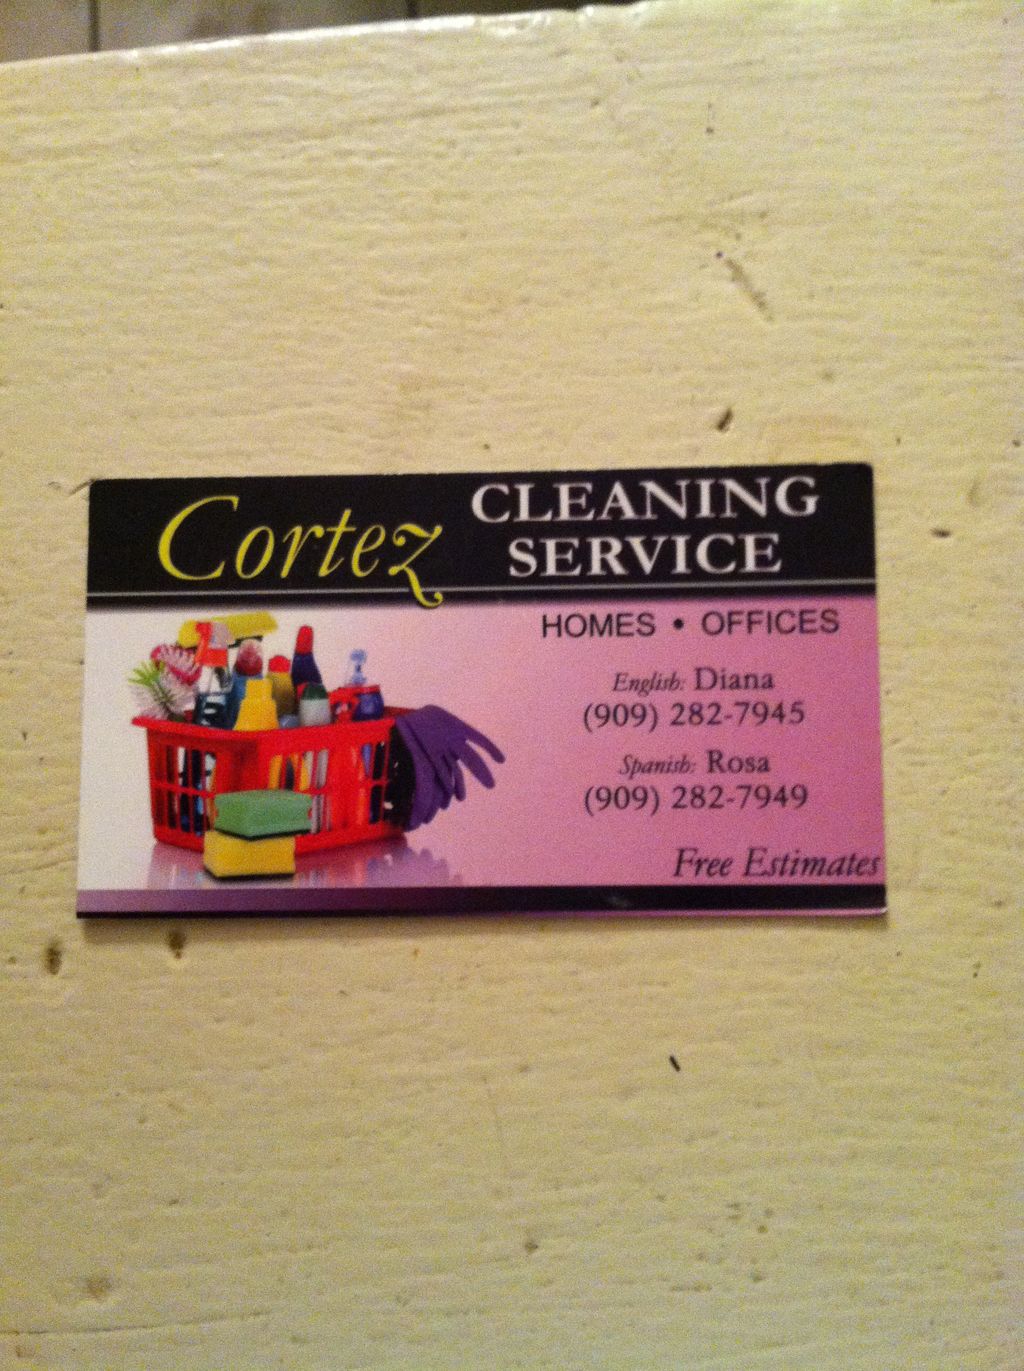 Cortez Cleaning Service